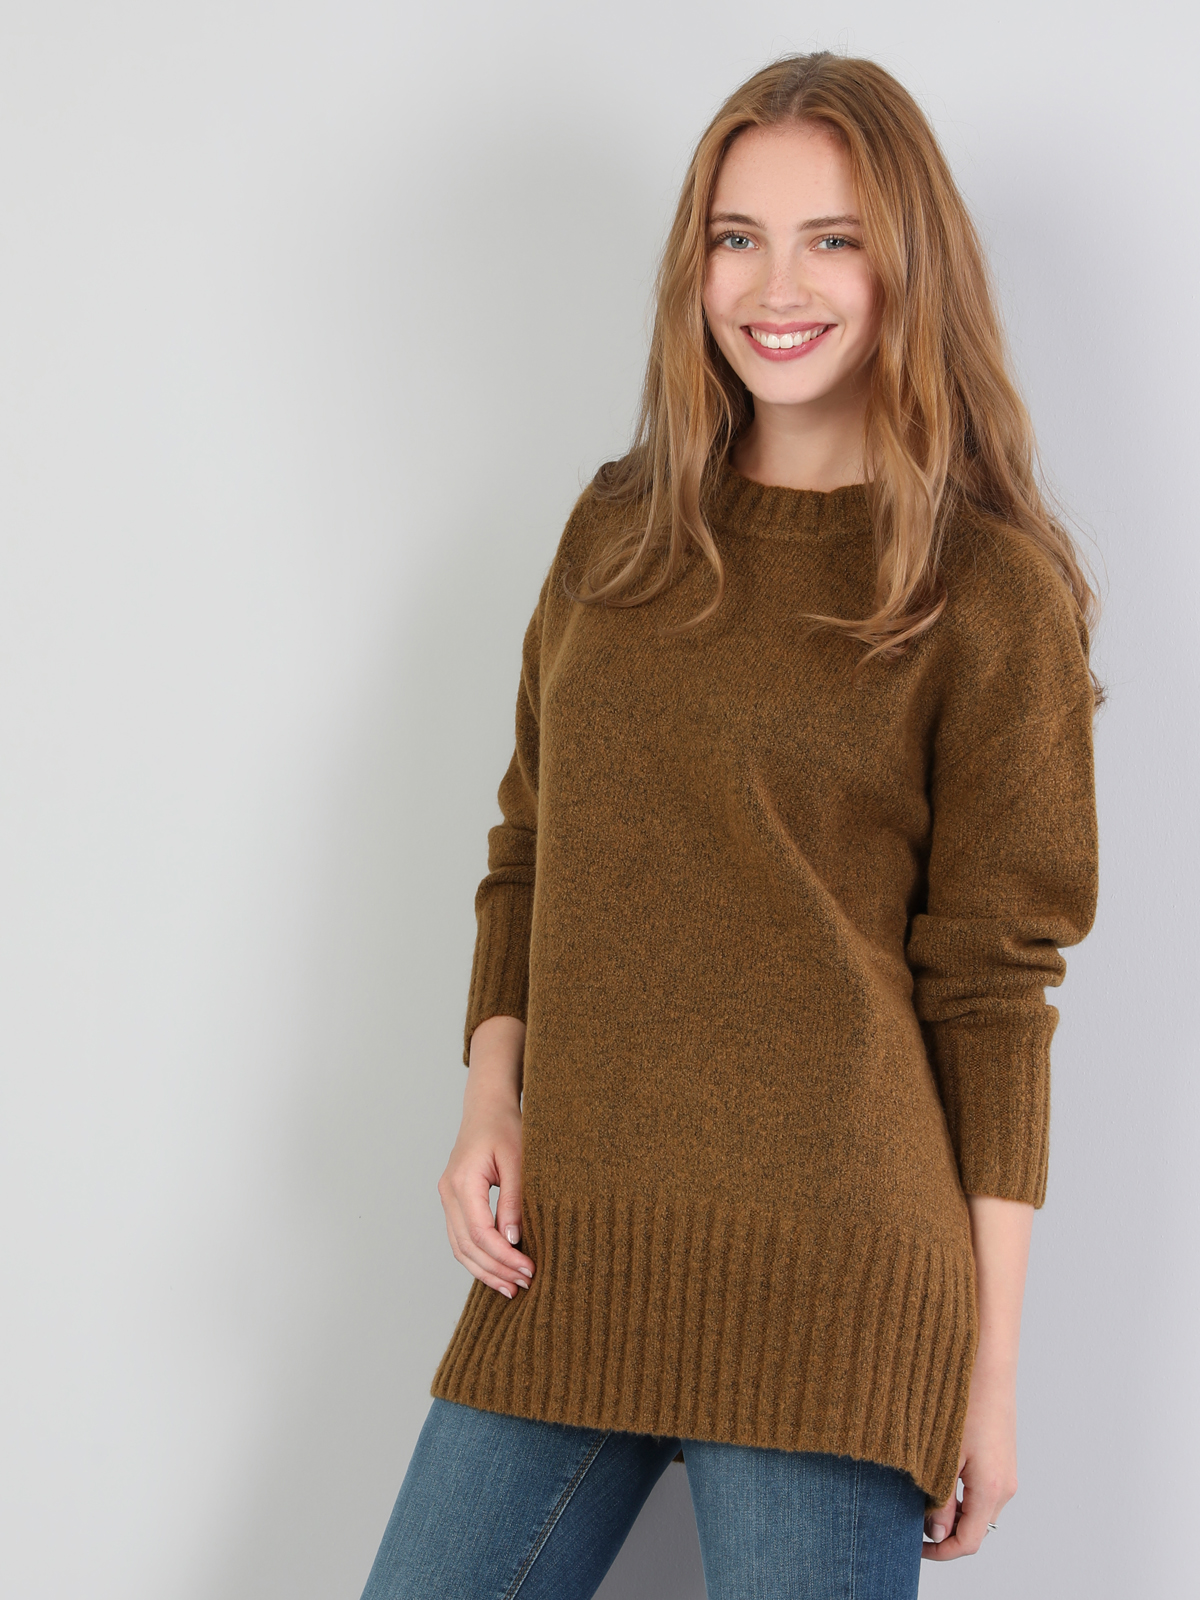 Colins Green Woman Sweaters. 2